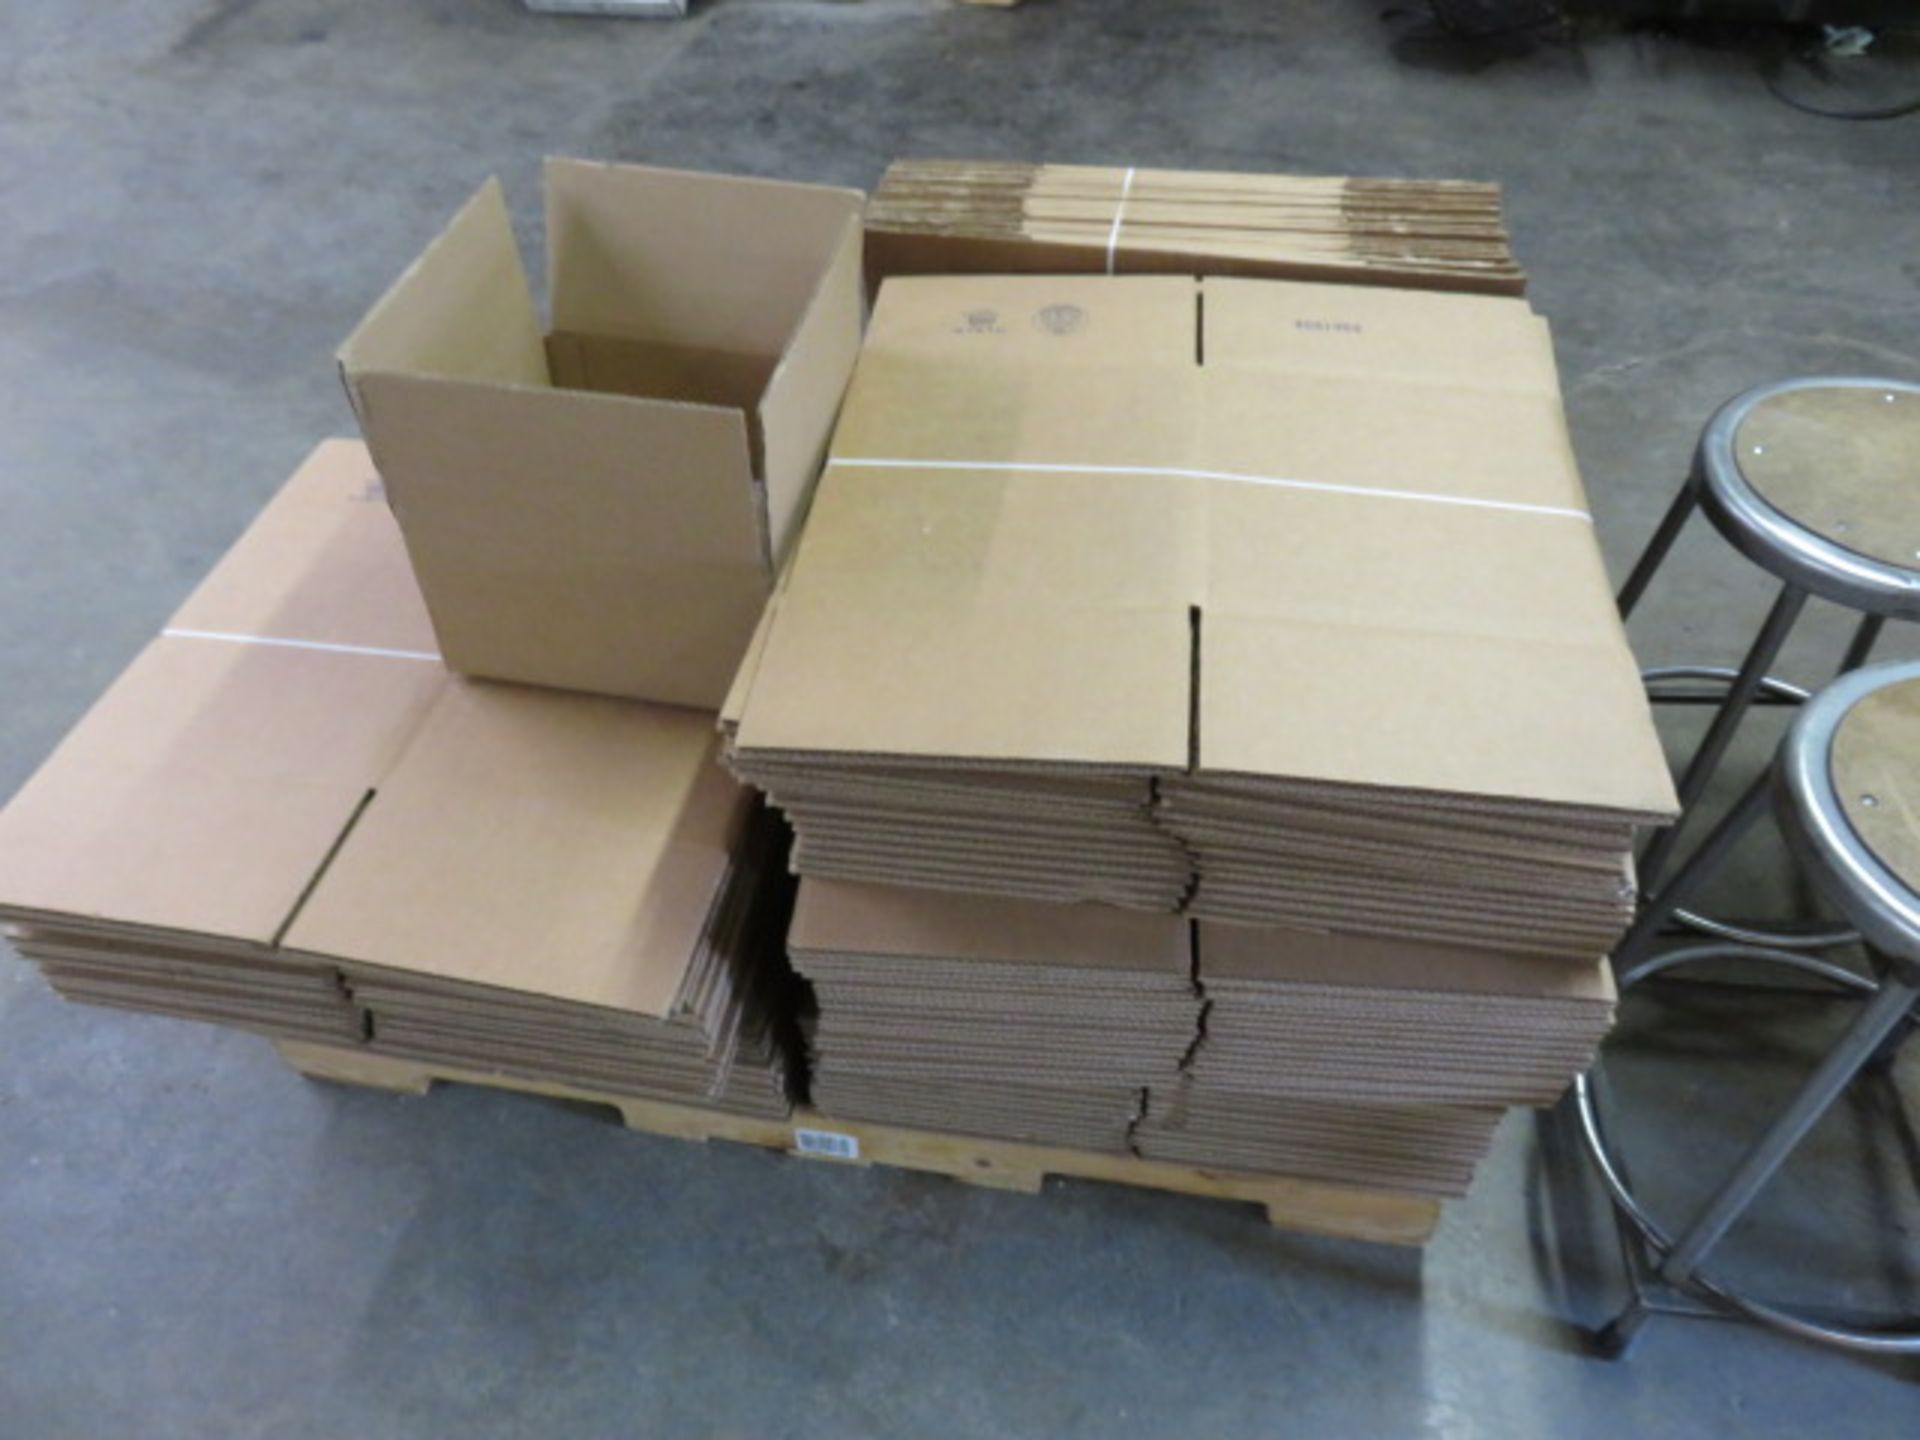 NEW K/D & DIE CUT BOXES, EGG CRATES, FOAM PUCHES, BAGS - Image 8 of 8